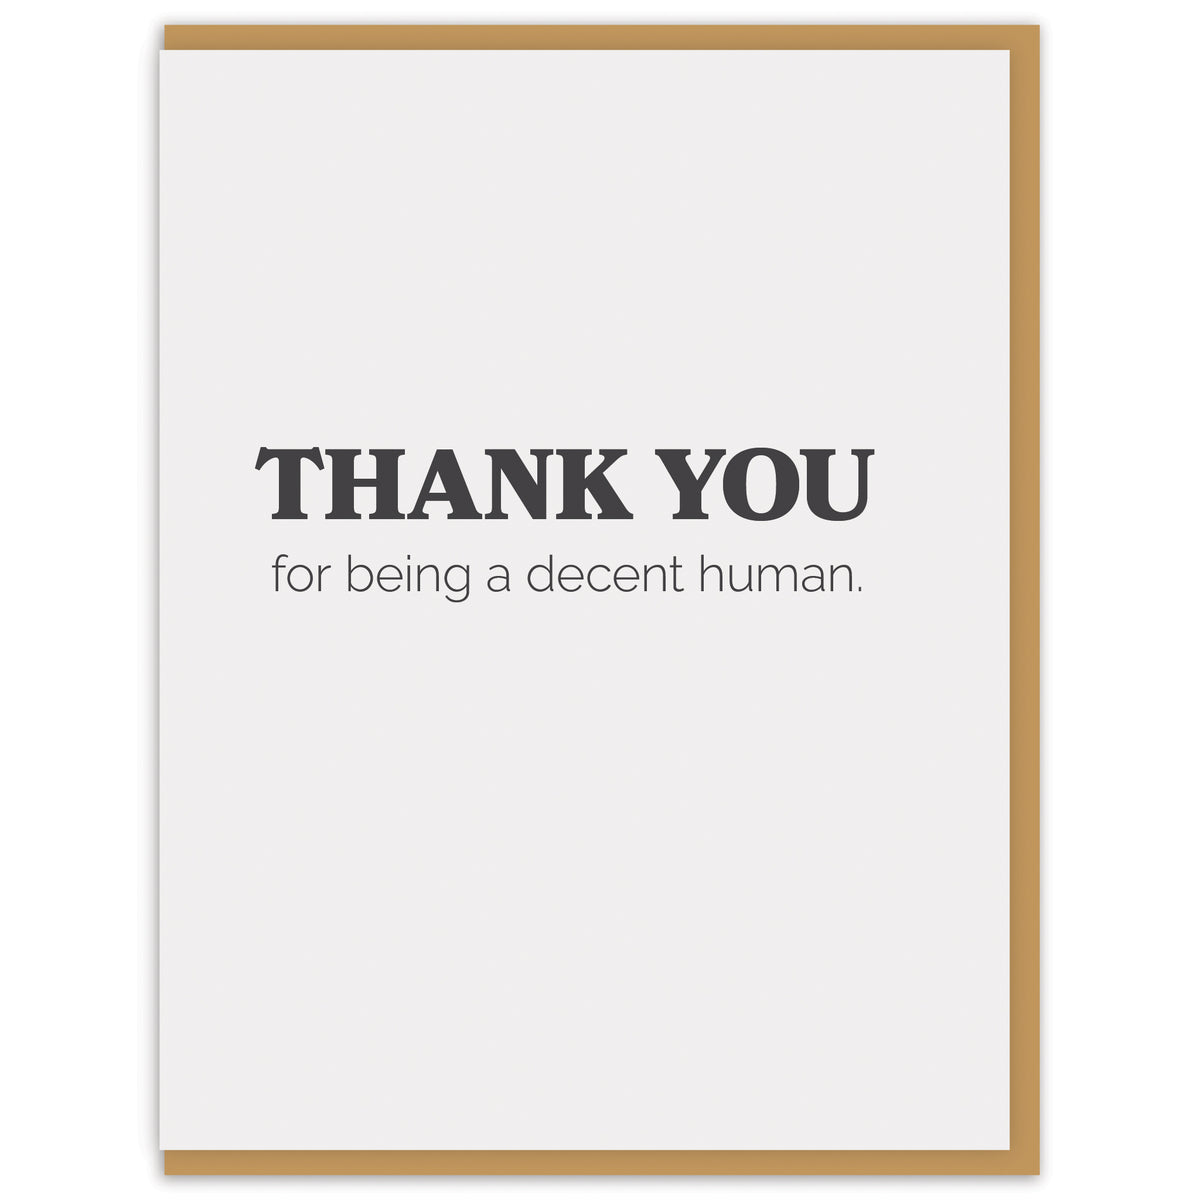 Thank you for being a decent human